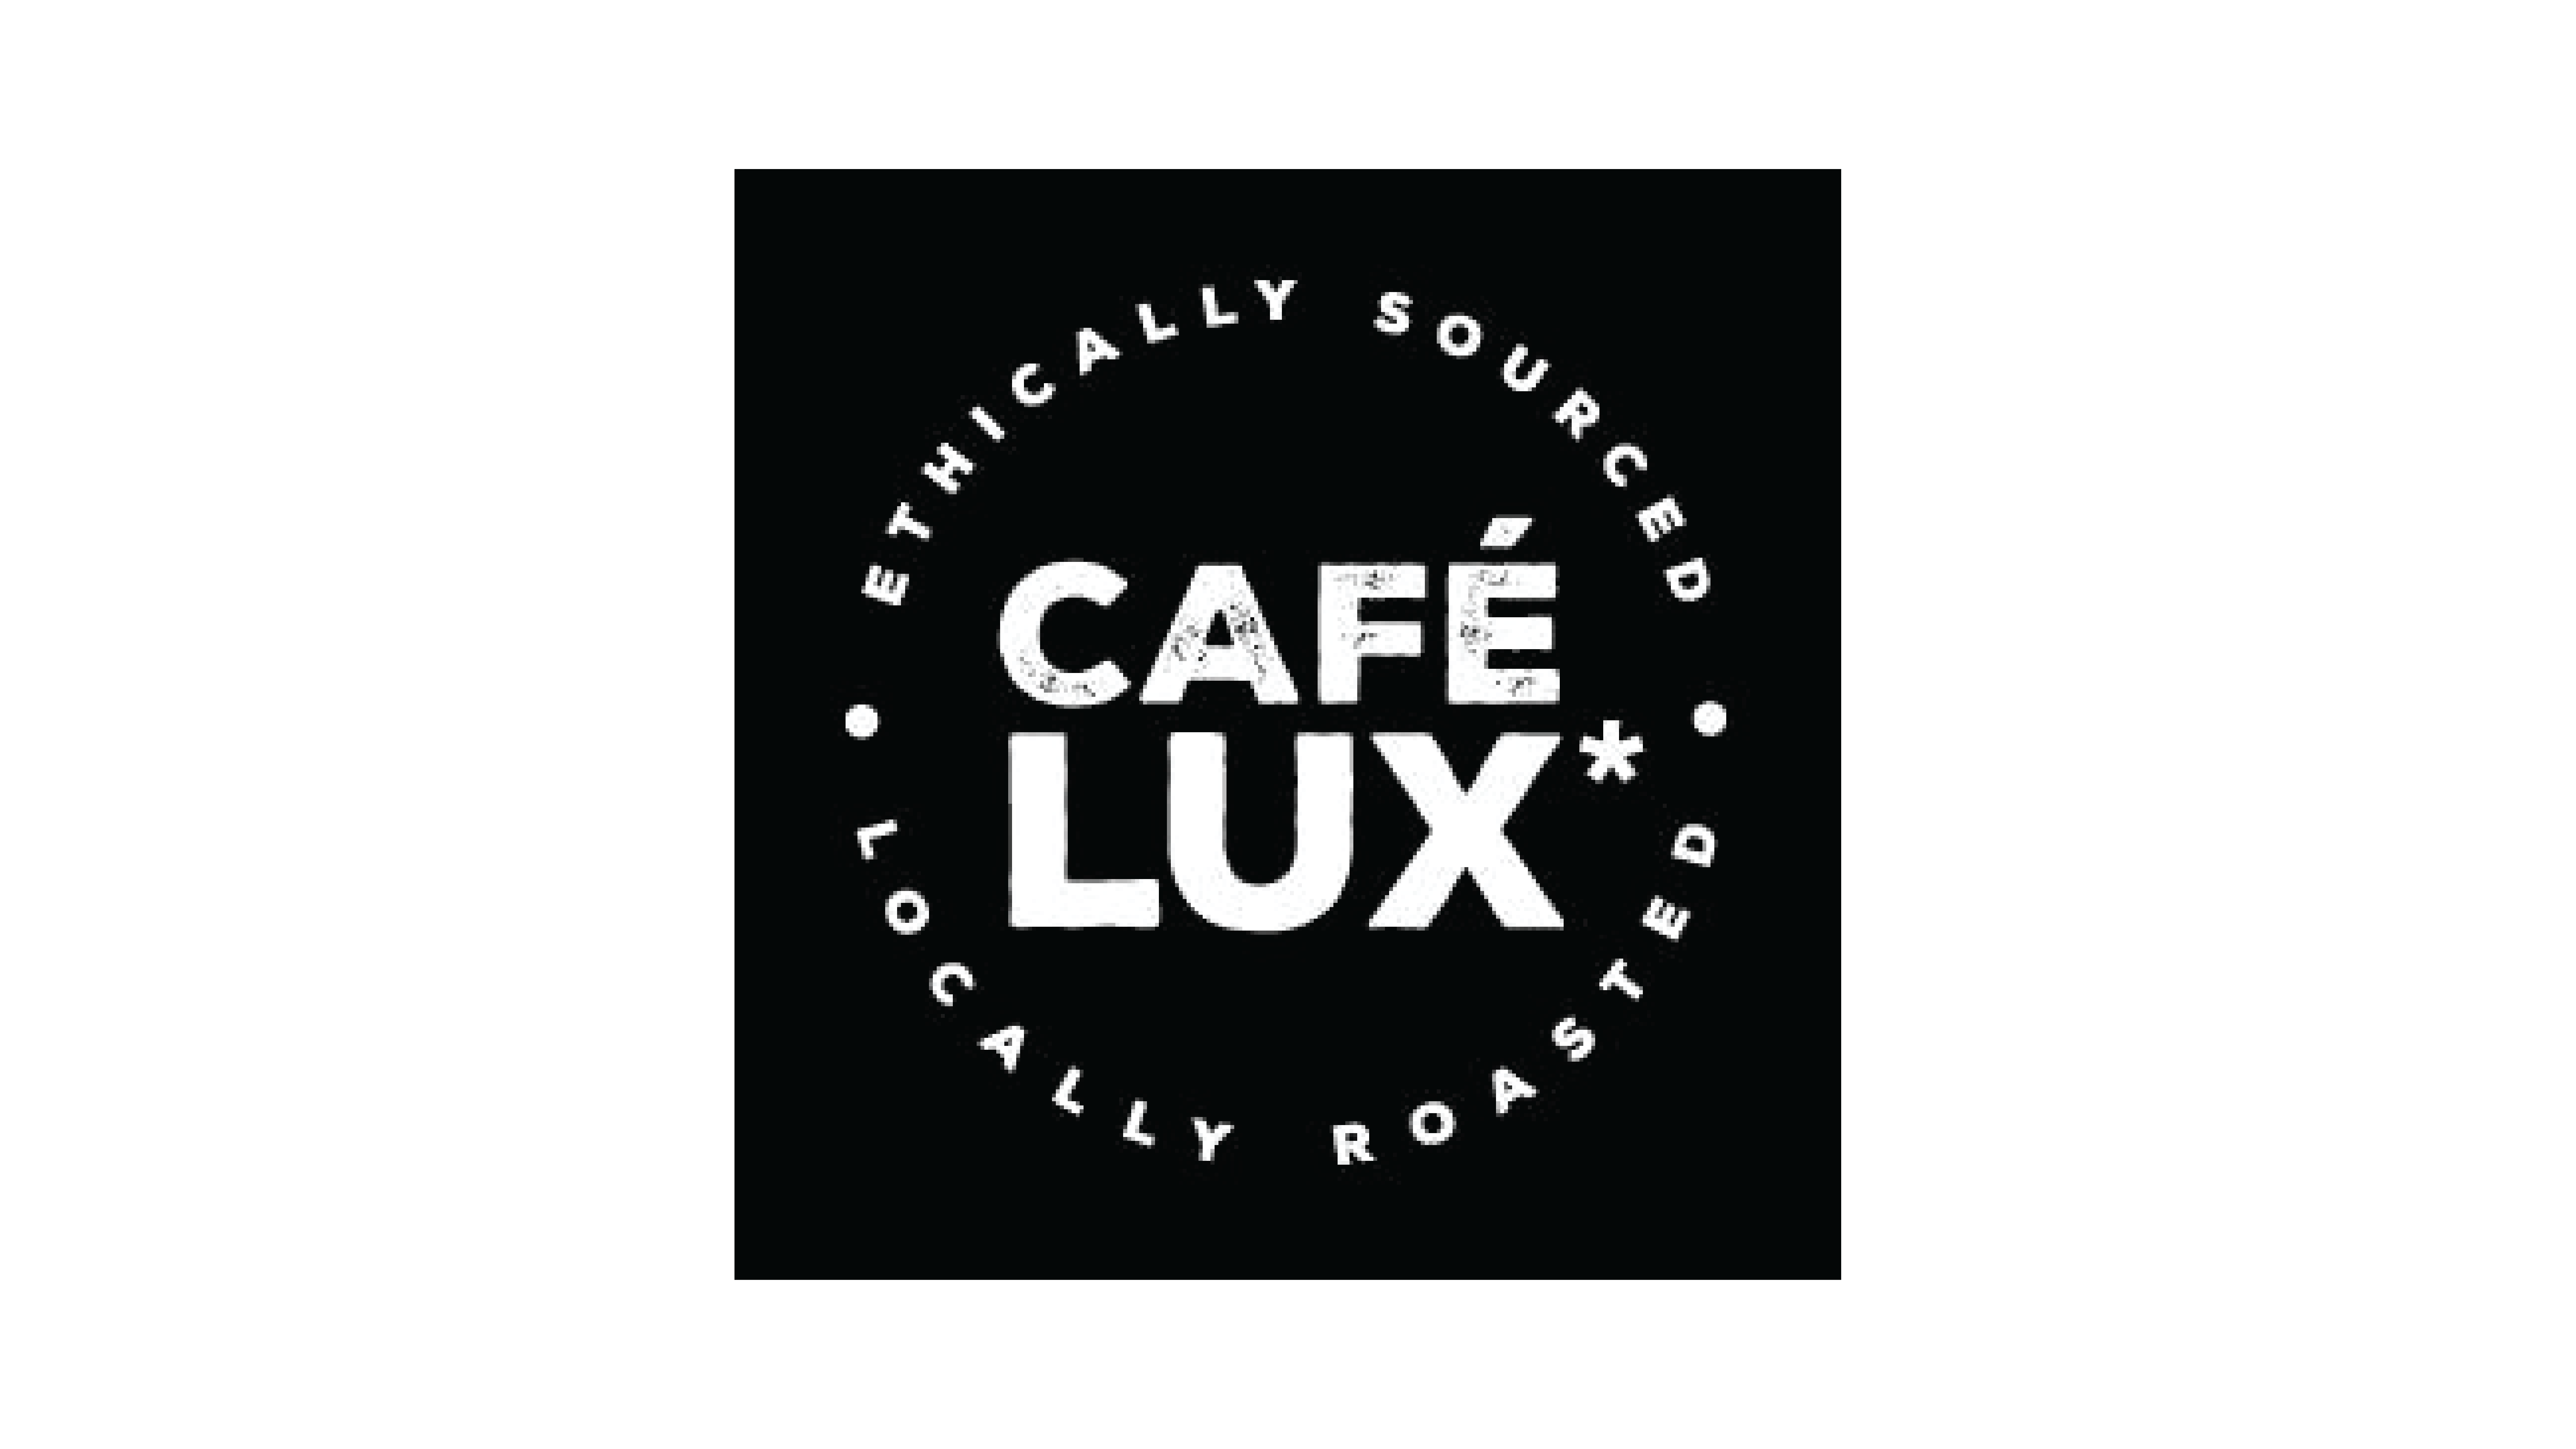 CAFE LUX